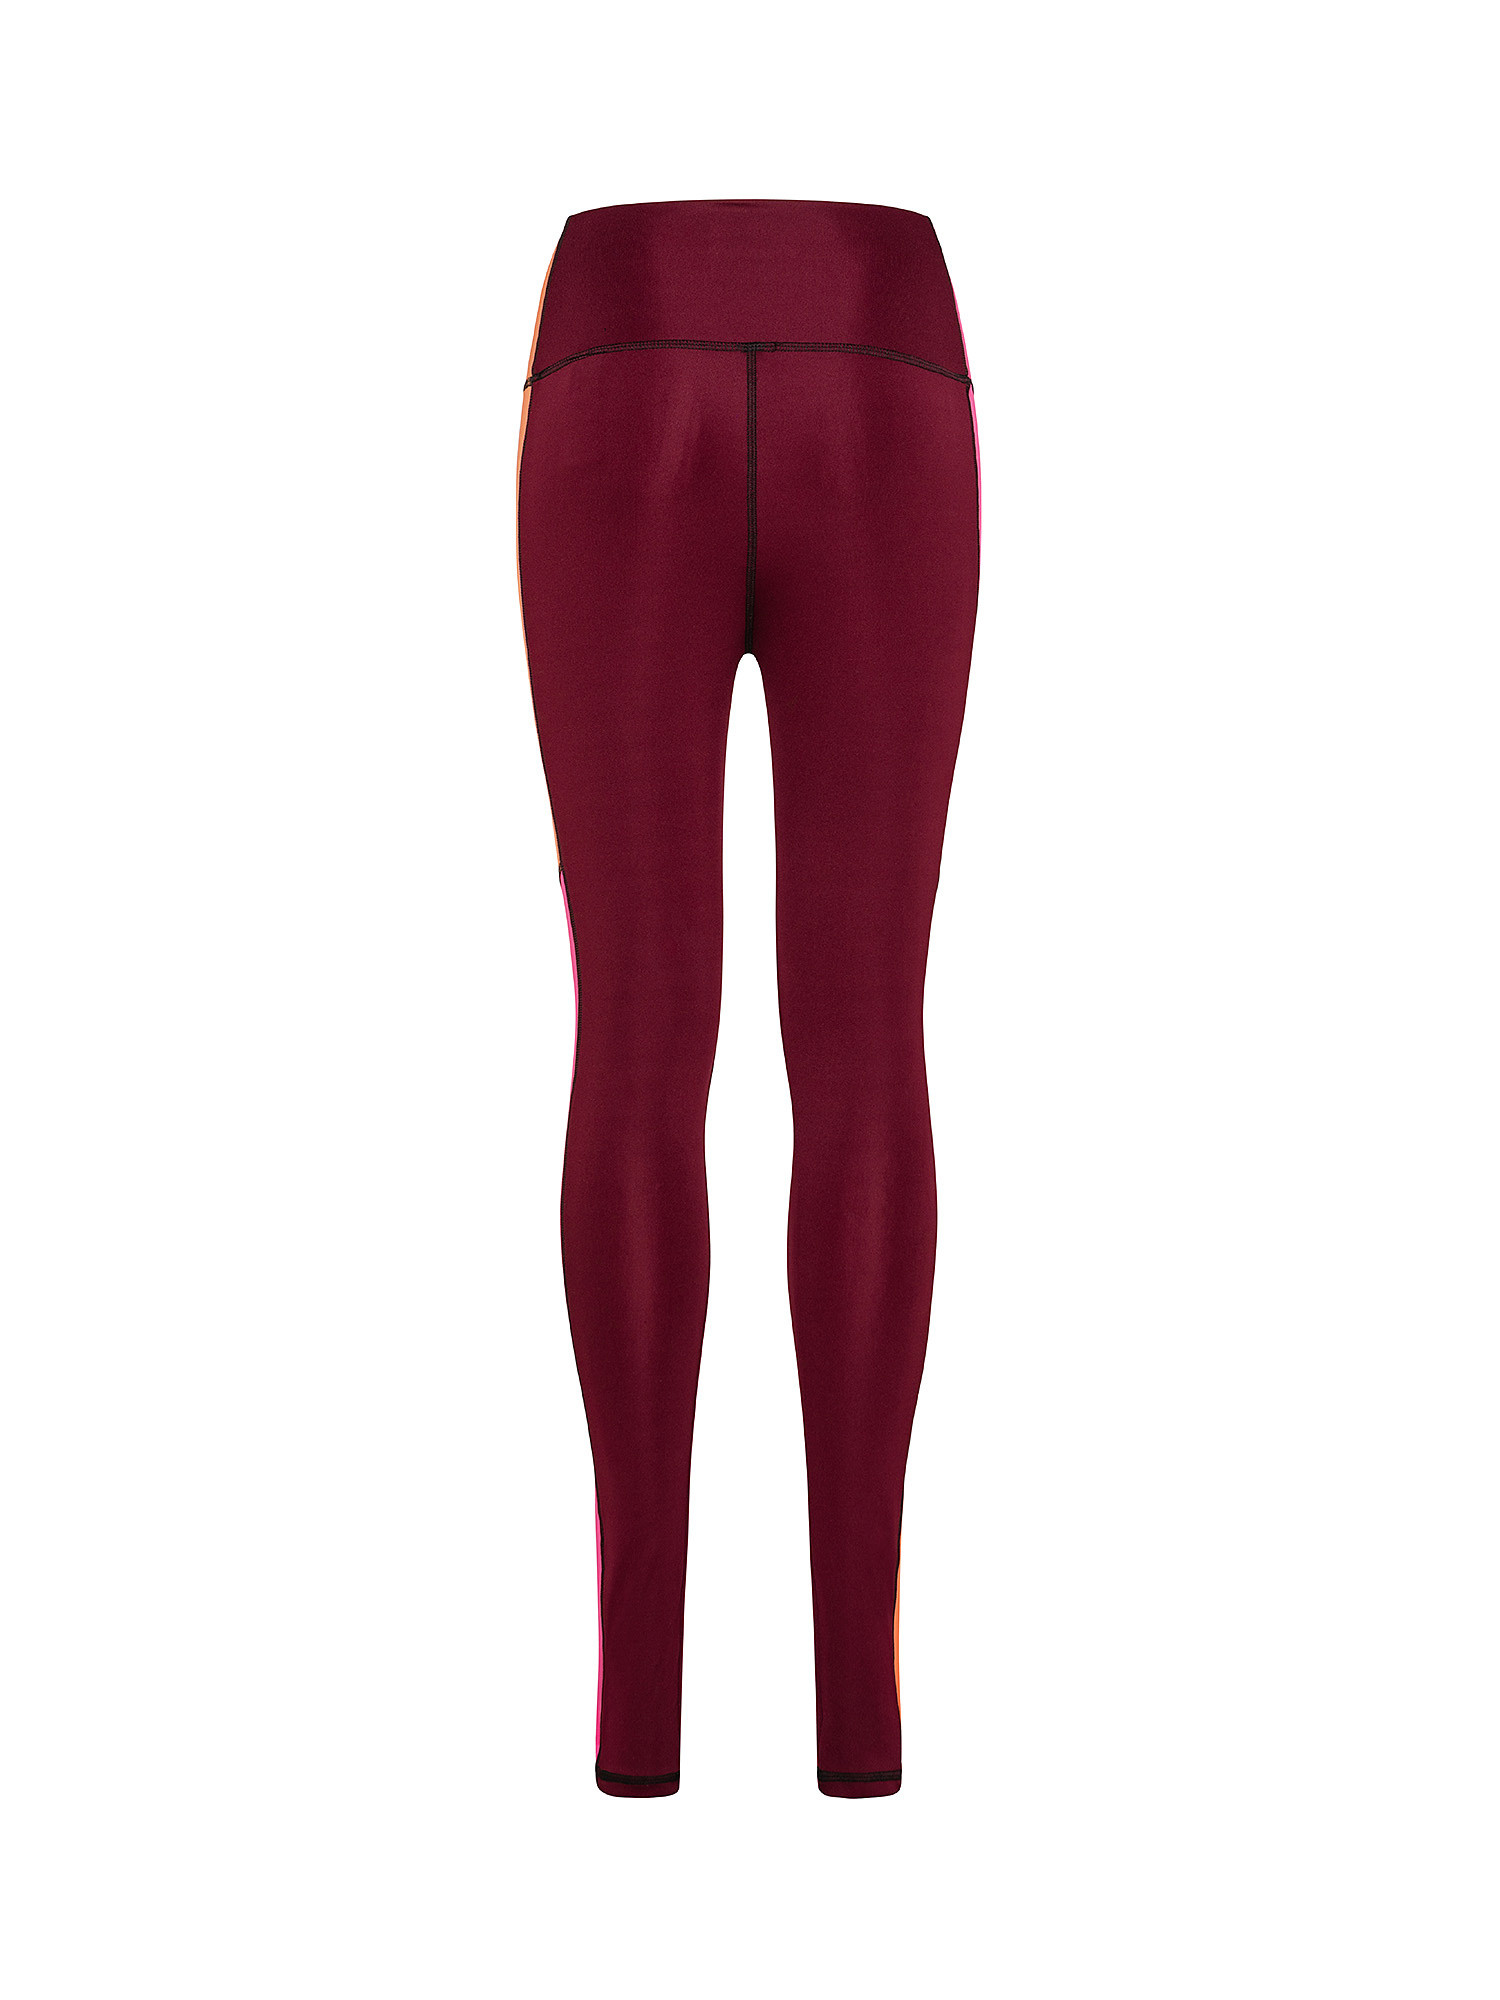 Trousers, Red Bordeaux, large image number 2